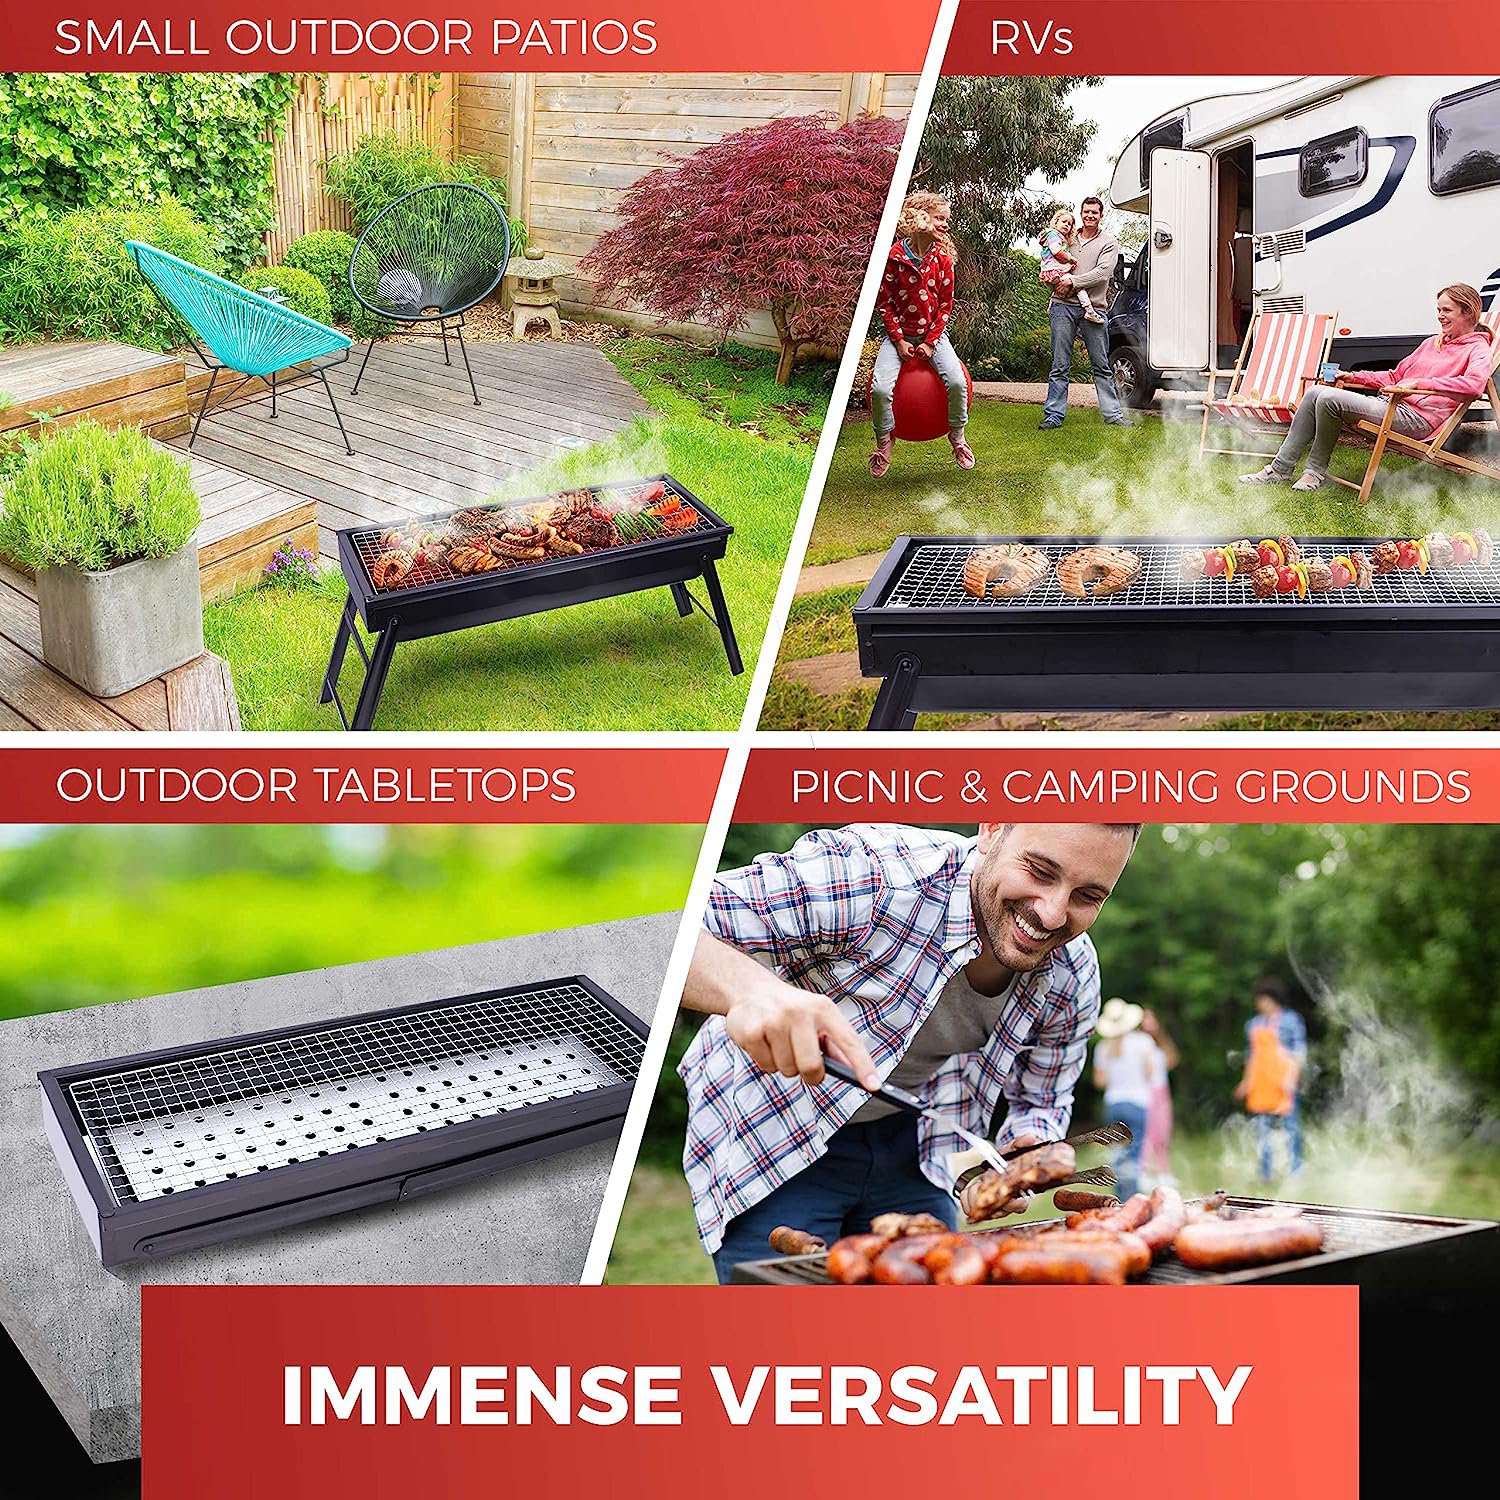 Portable Charcoal Grill and Smoker